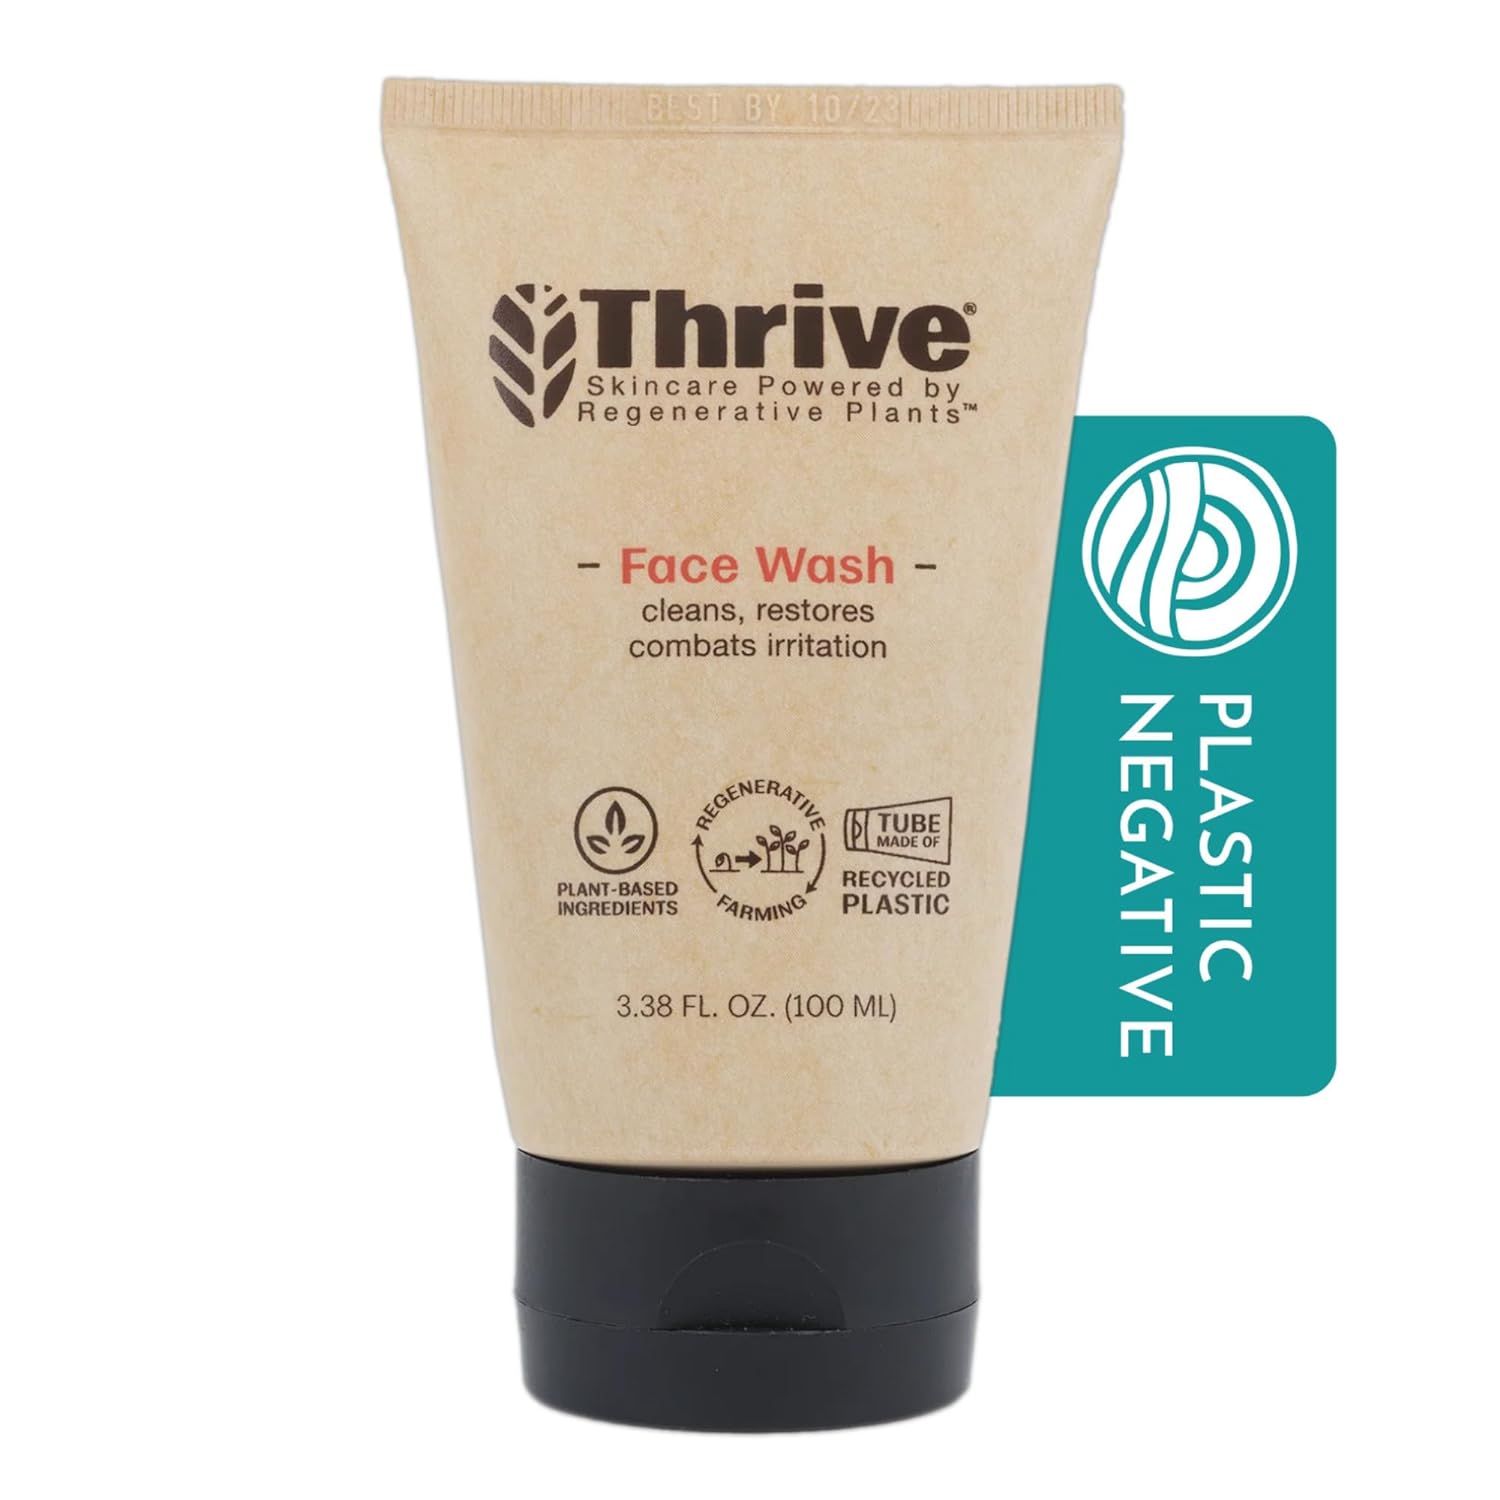 Thrive Natural Care Face Wash Gel for Men & Women - Daily Facial Cleanser with Anti-Oxidants & Unique Natural Ingredients for Healthier Skin Care - Vegan